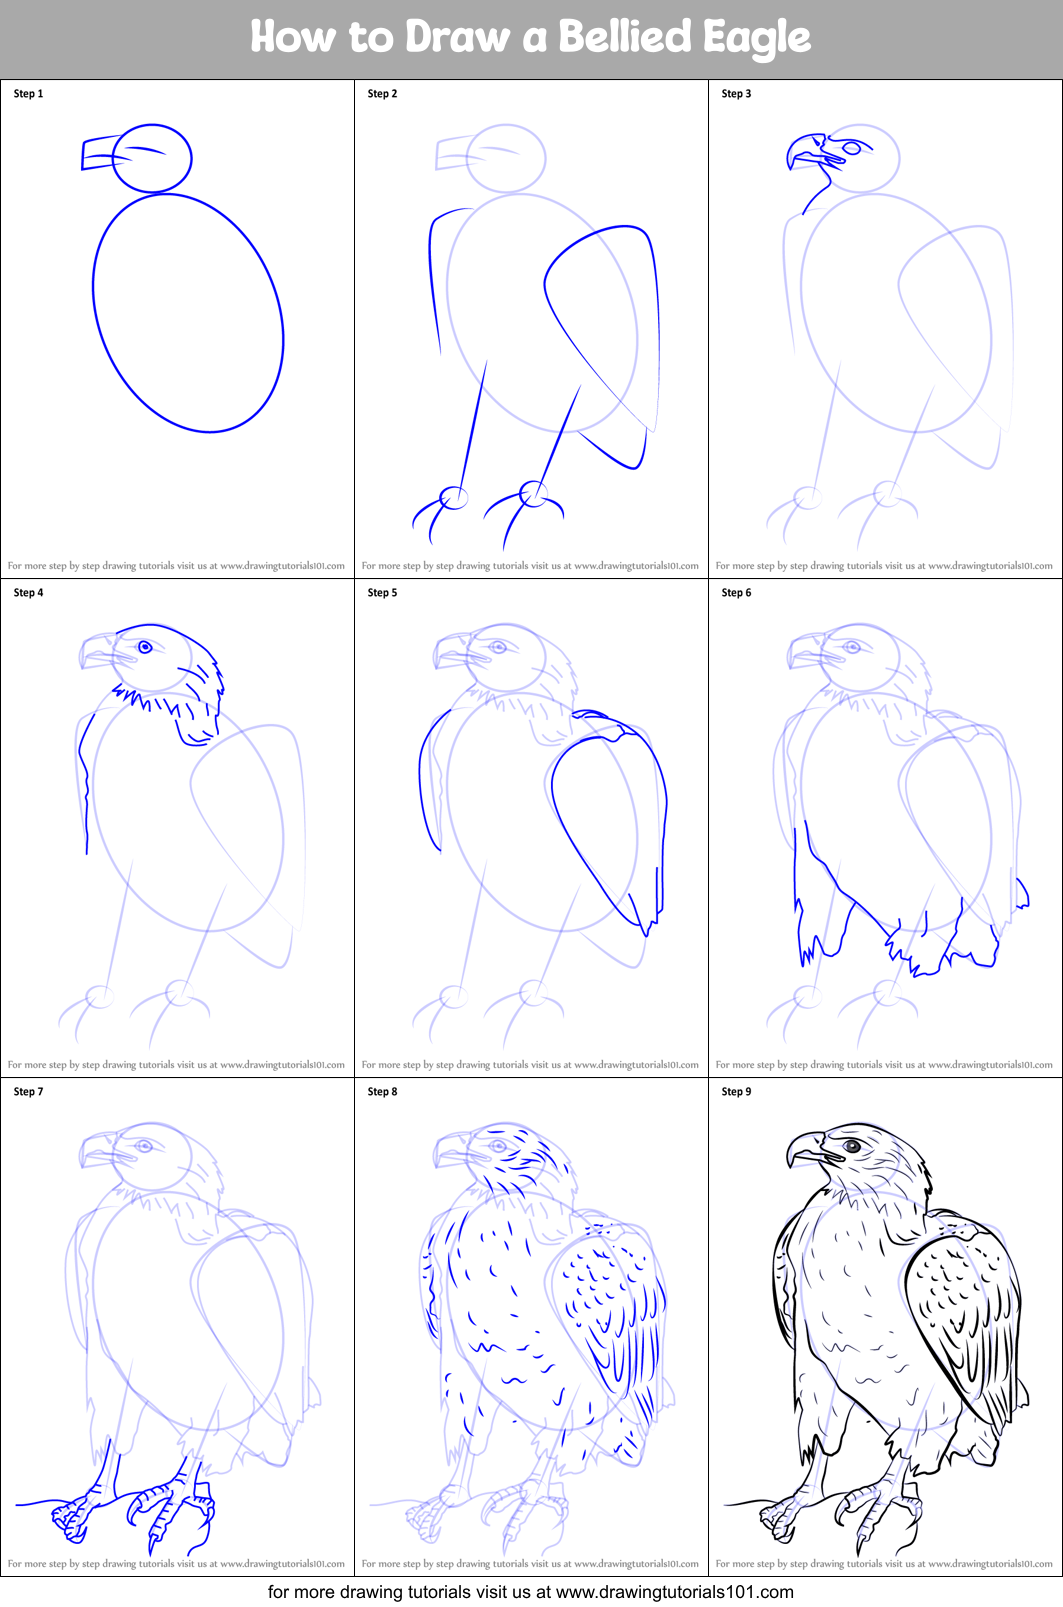 How to Draw a Bellied Eagle printable step by step drawing sheet